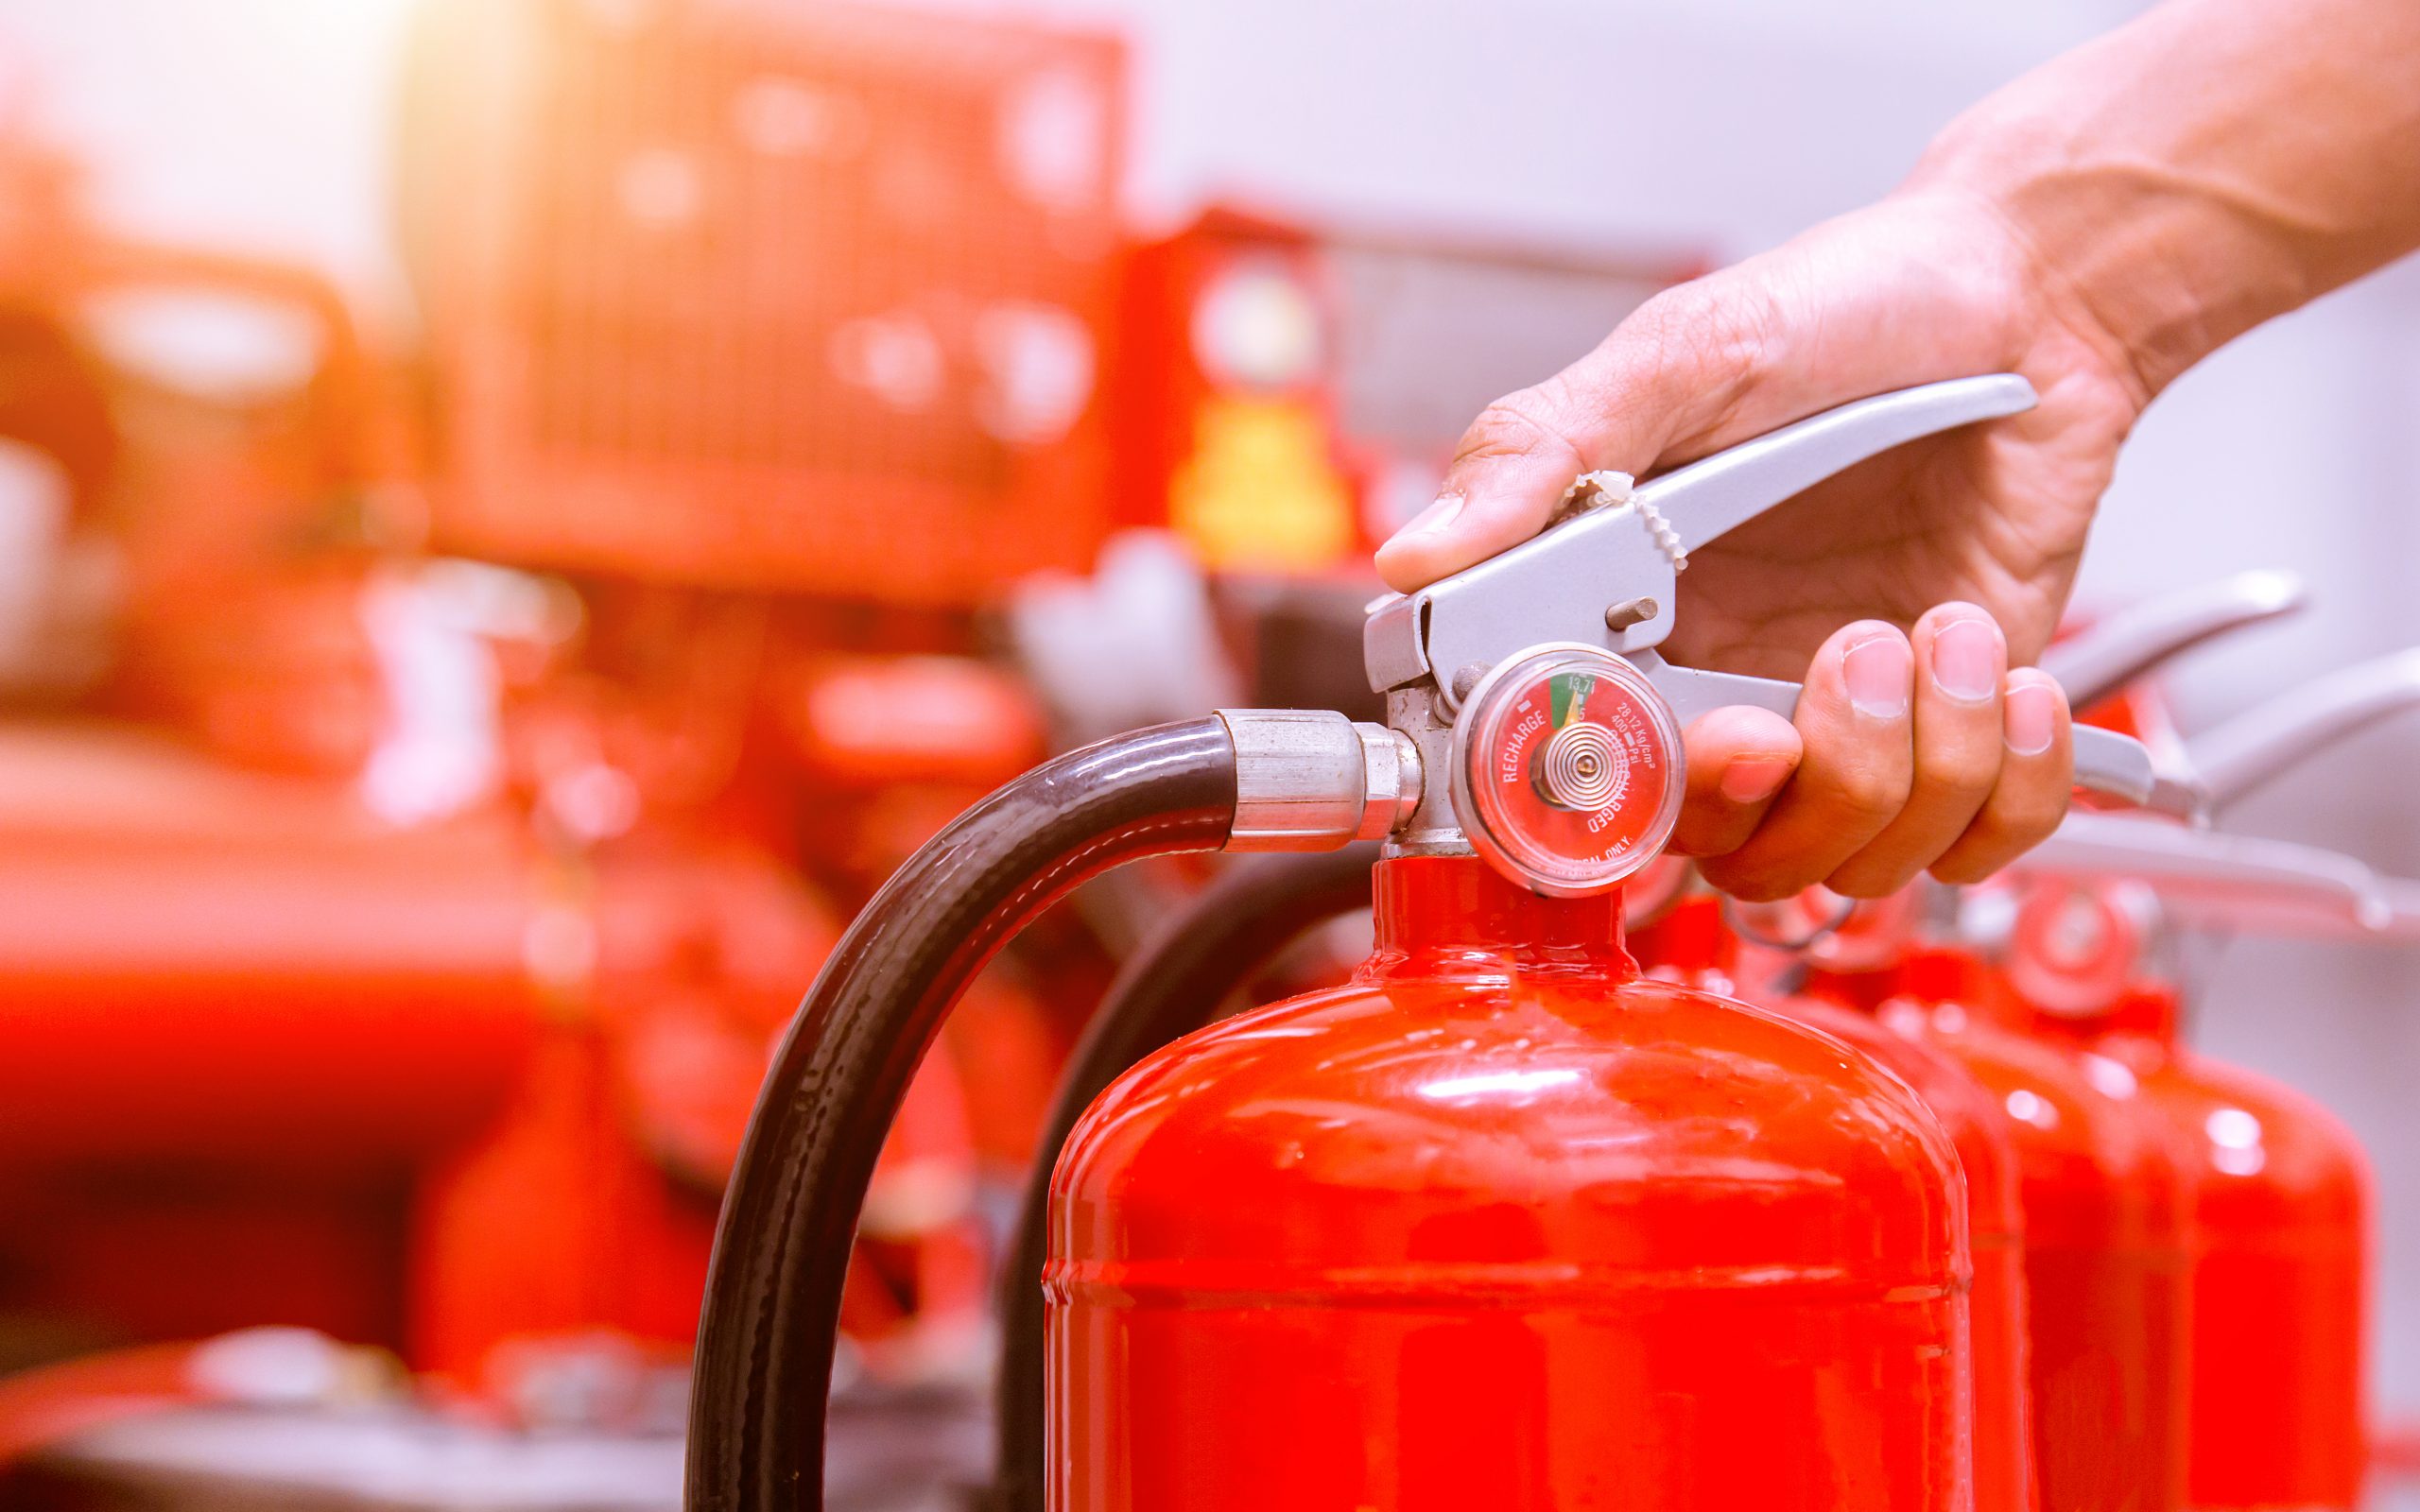 What type of fire protection services do you offer?